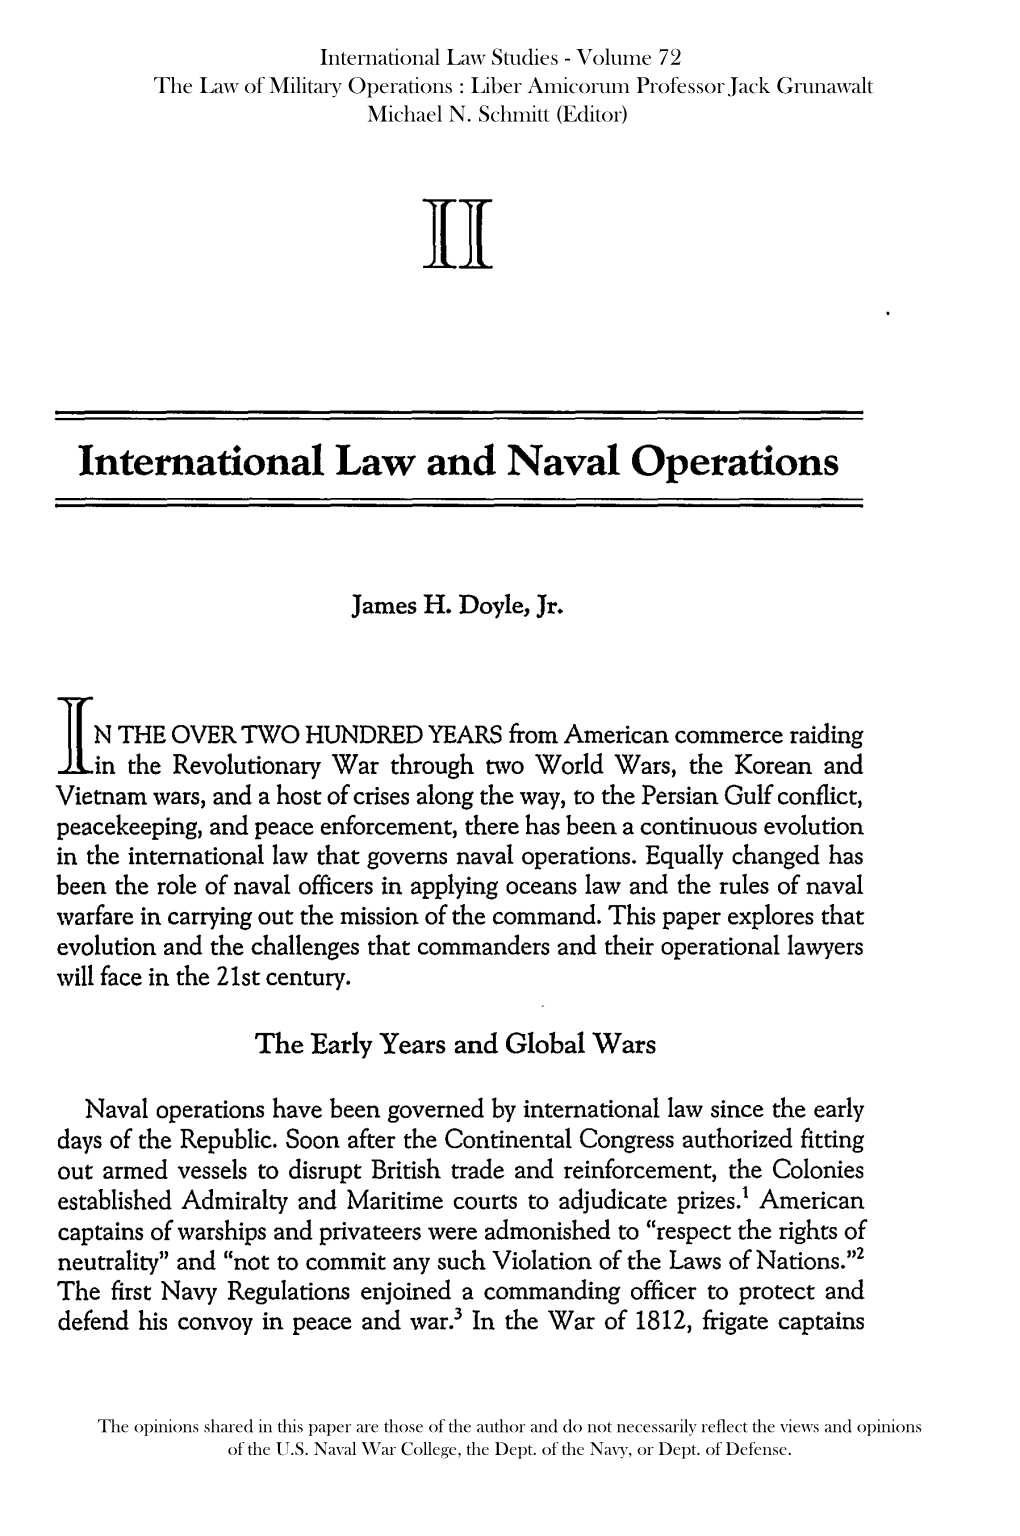 International Law and Naval Operations